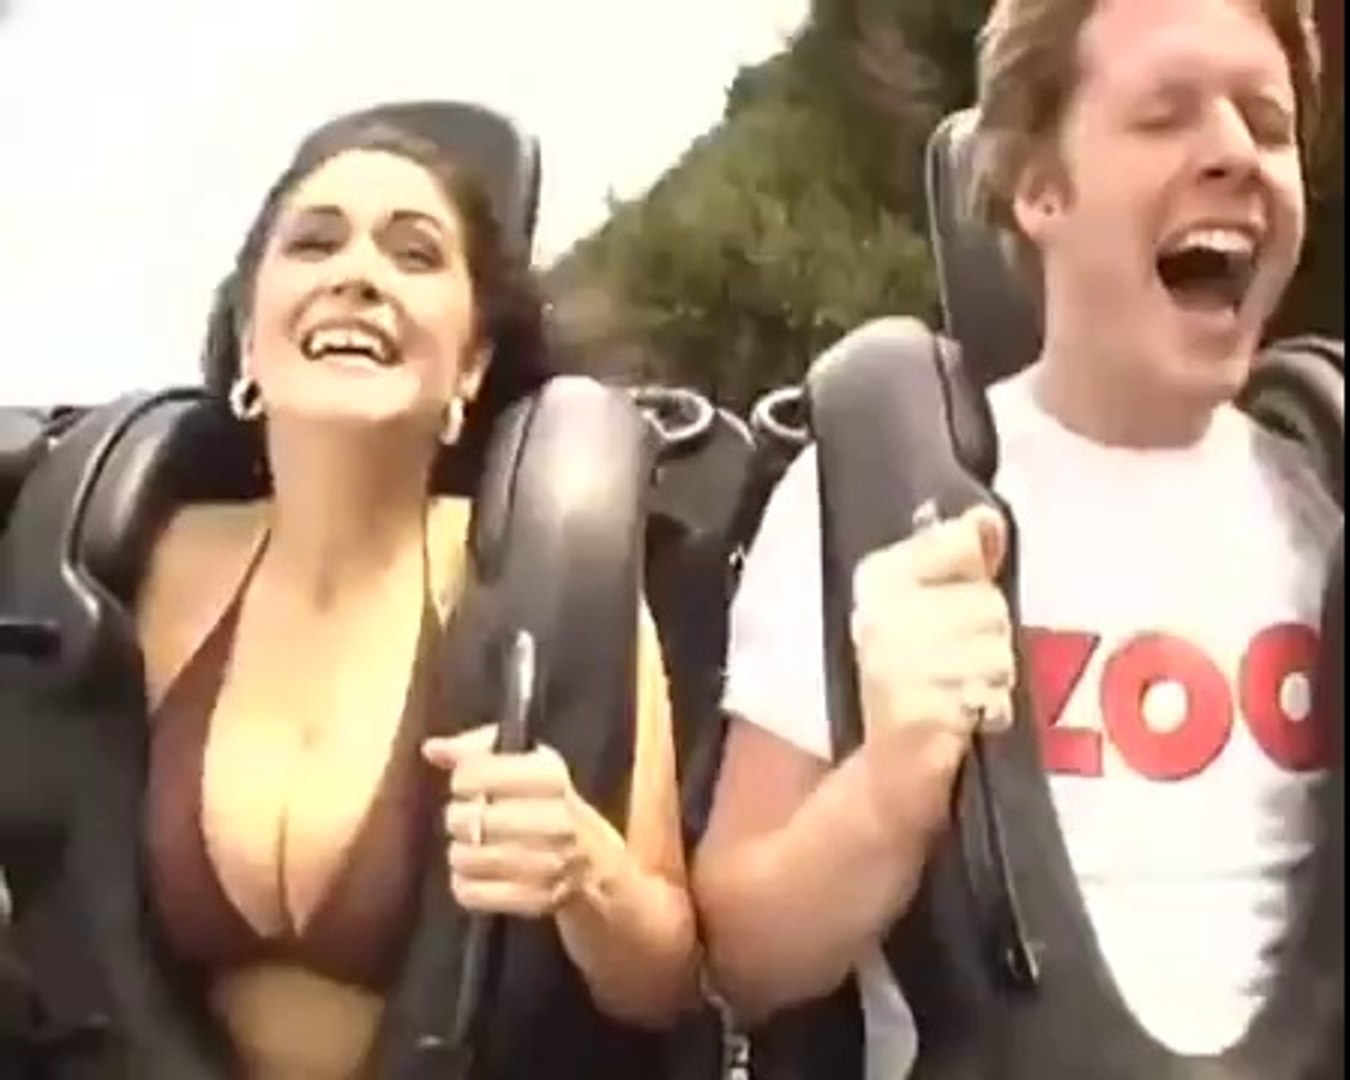 Boobs fall out on slingshot ride